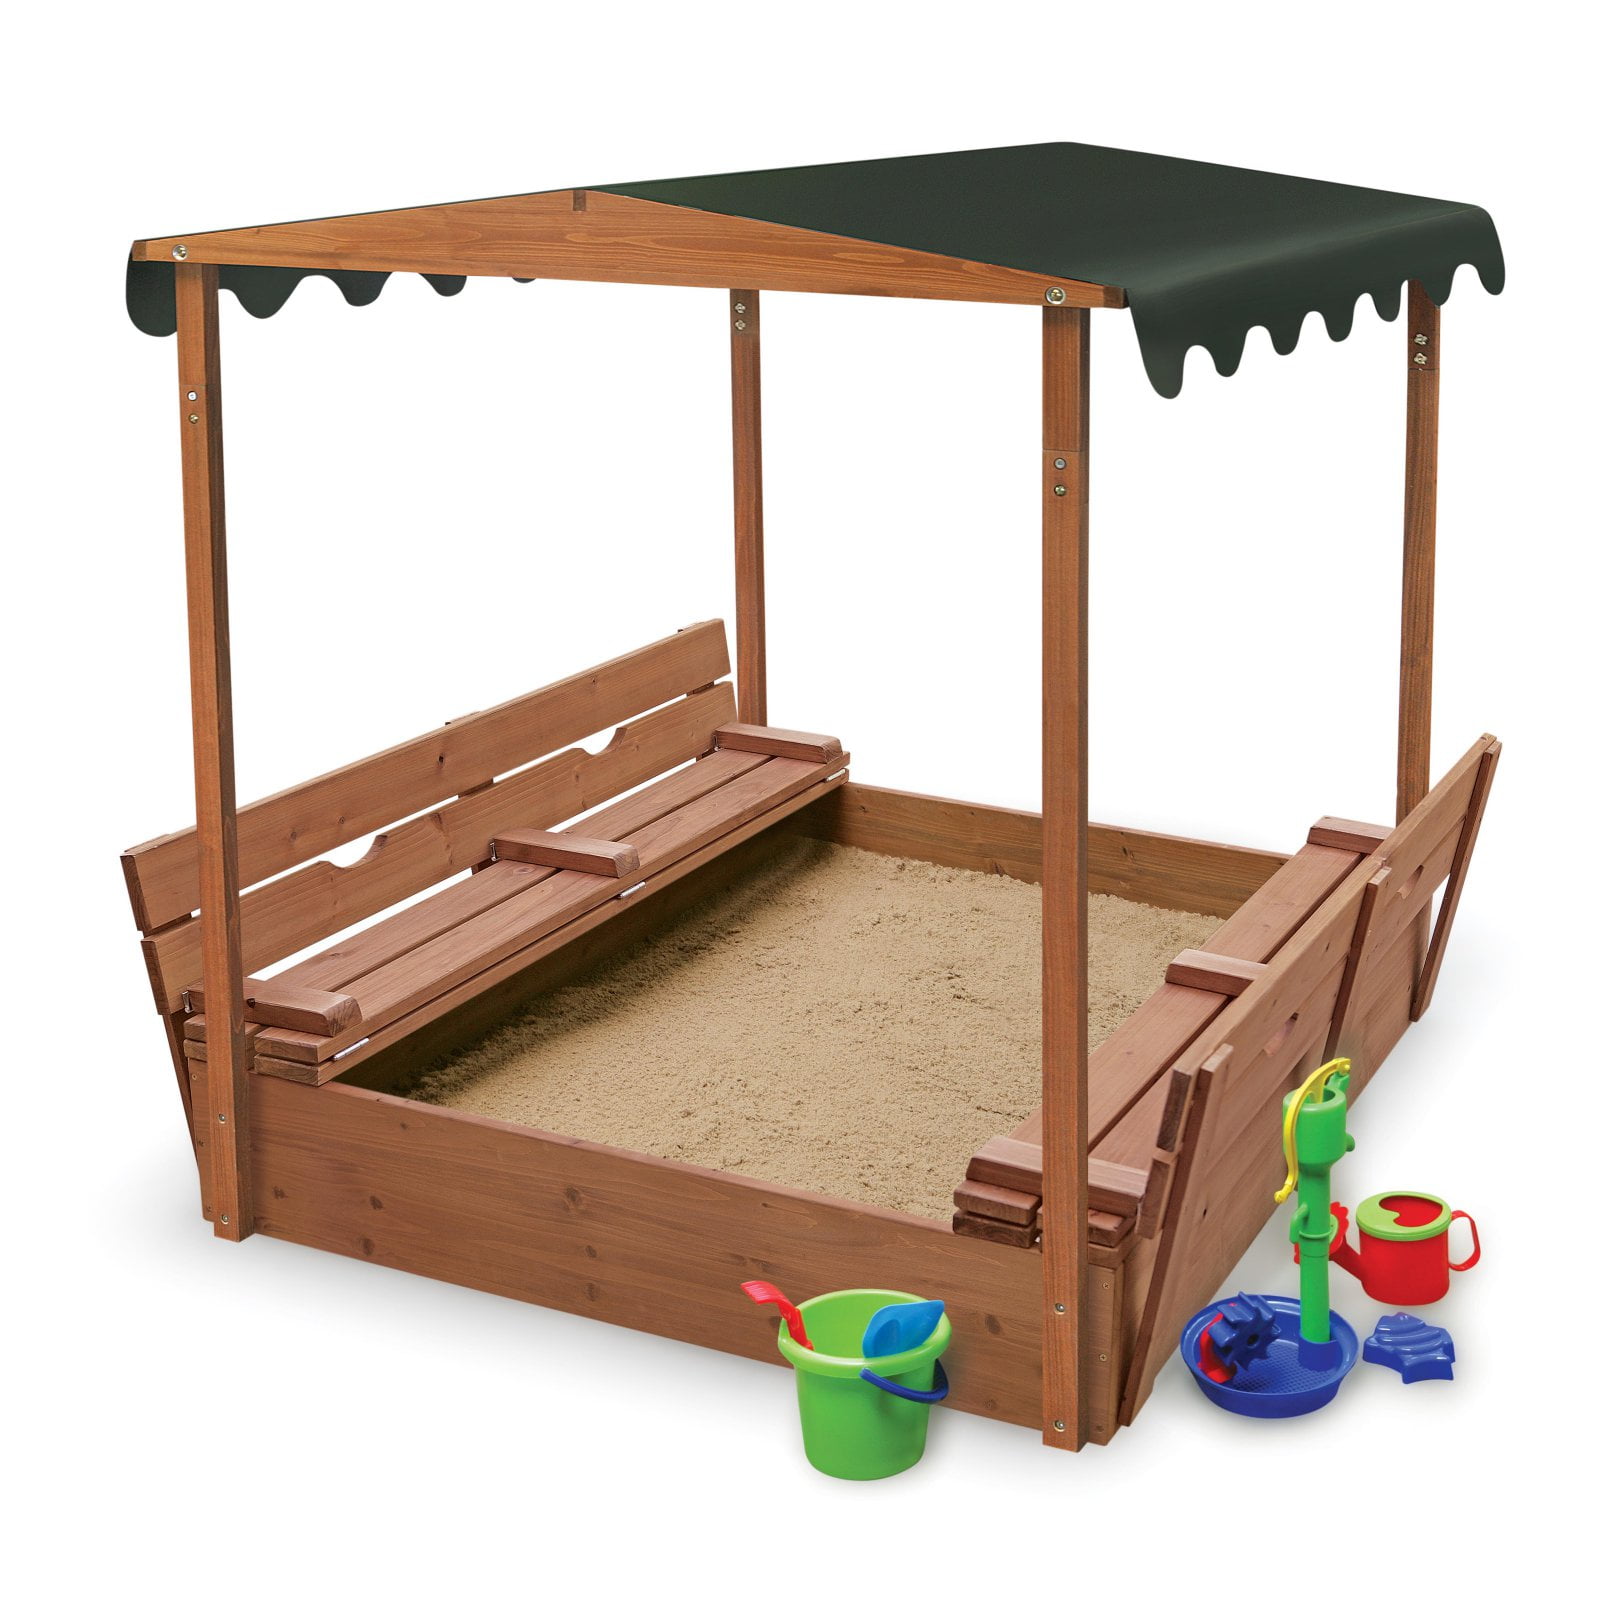 Convertible Cedar Sandbox with Canopy and 2 Bench Seats kids kid outdoor 